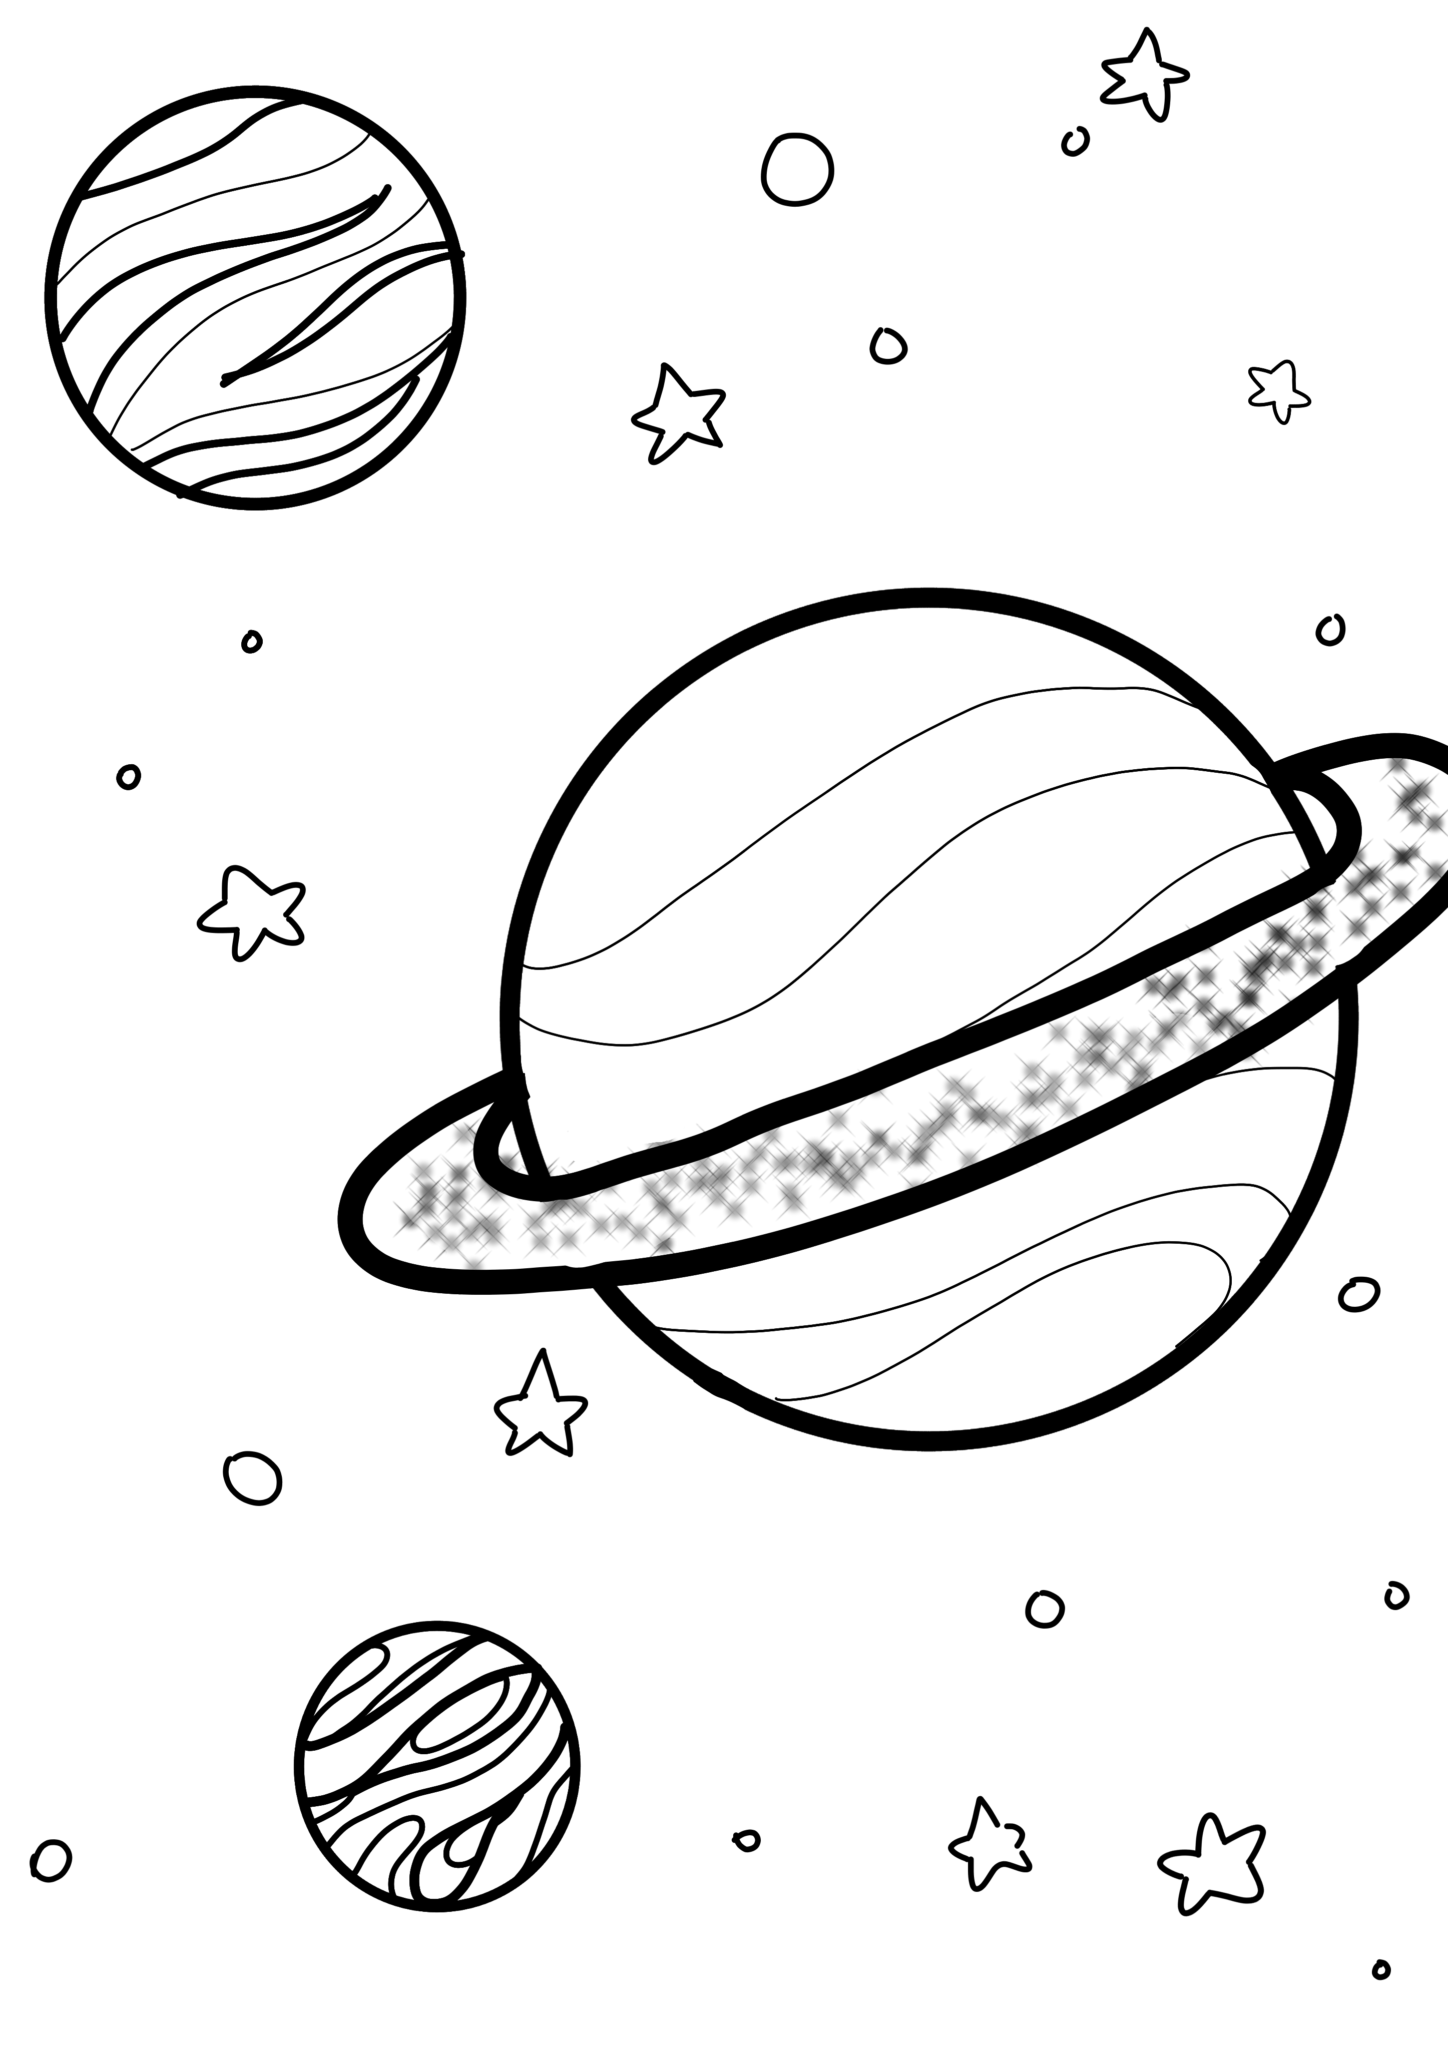 Free Colouring Pages | SCYAP